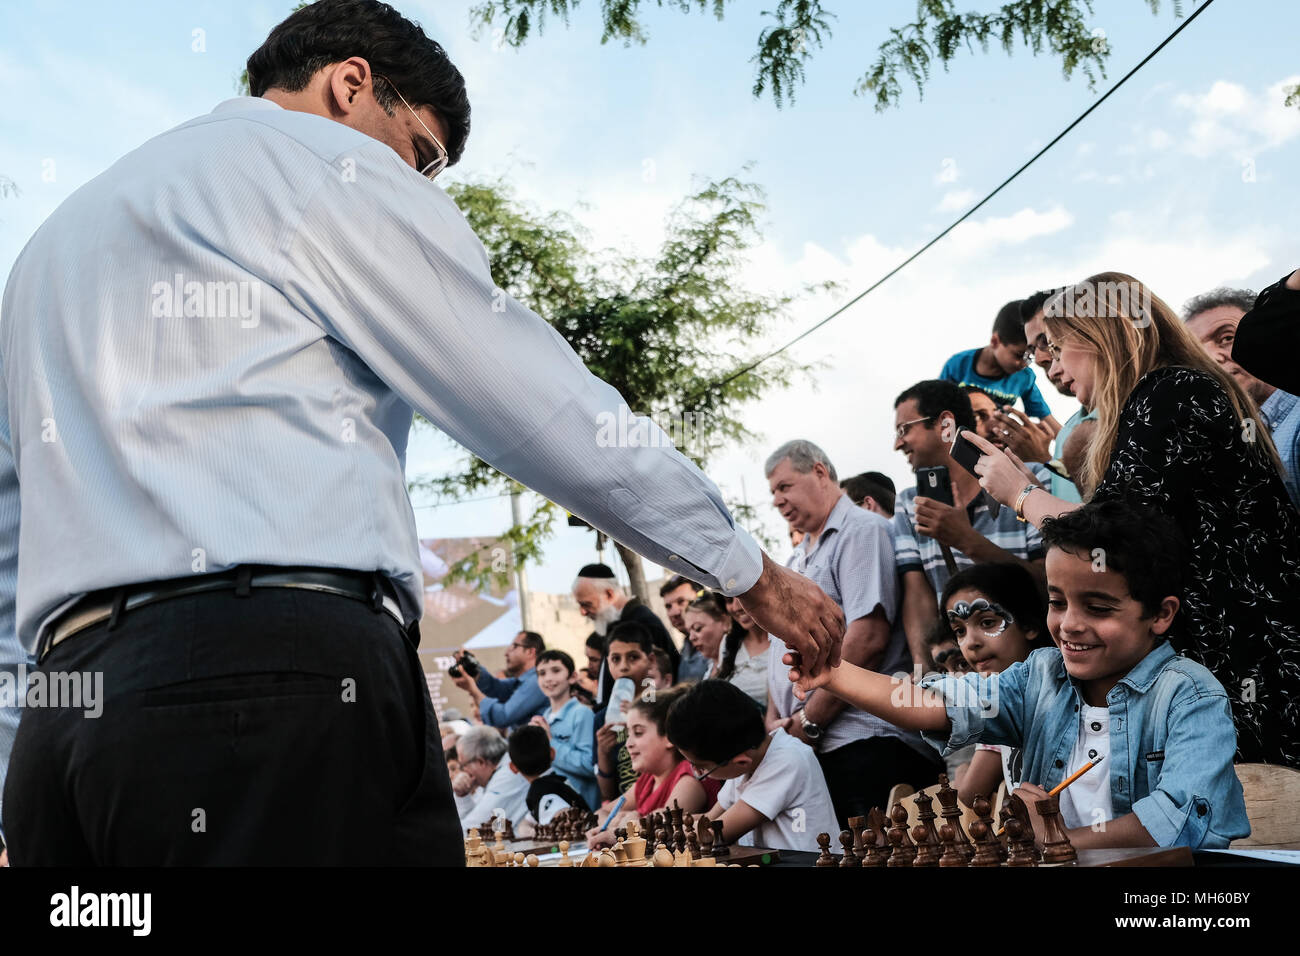 Jerusalem, Israel. 30th April, 2018. VISWANATHAN VISHY ANAND, 49, Indian chess grandmaster, plays a game of chess against YEHONATAN AZULAI, 8, and against dozens of Israeli youth champions simultaneously at the Jaffa Gate in the framework of Israel's 70th Independence Day celebrations. Credit: Nir Alon/Alamy Live News Stock Photo